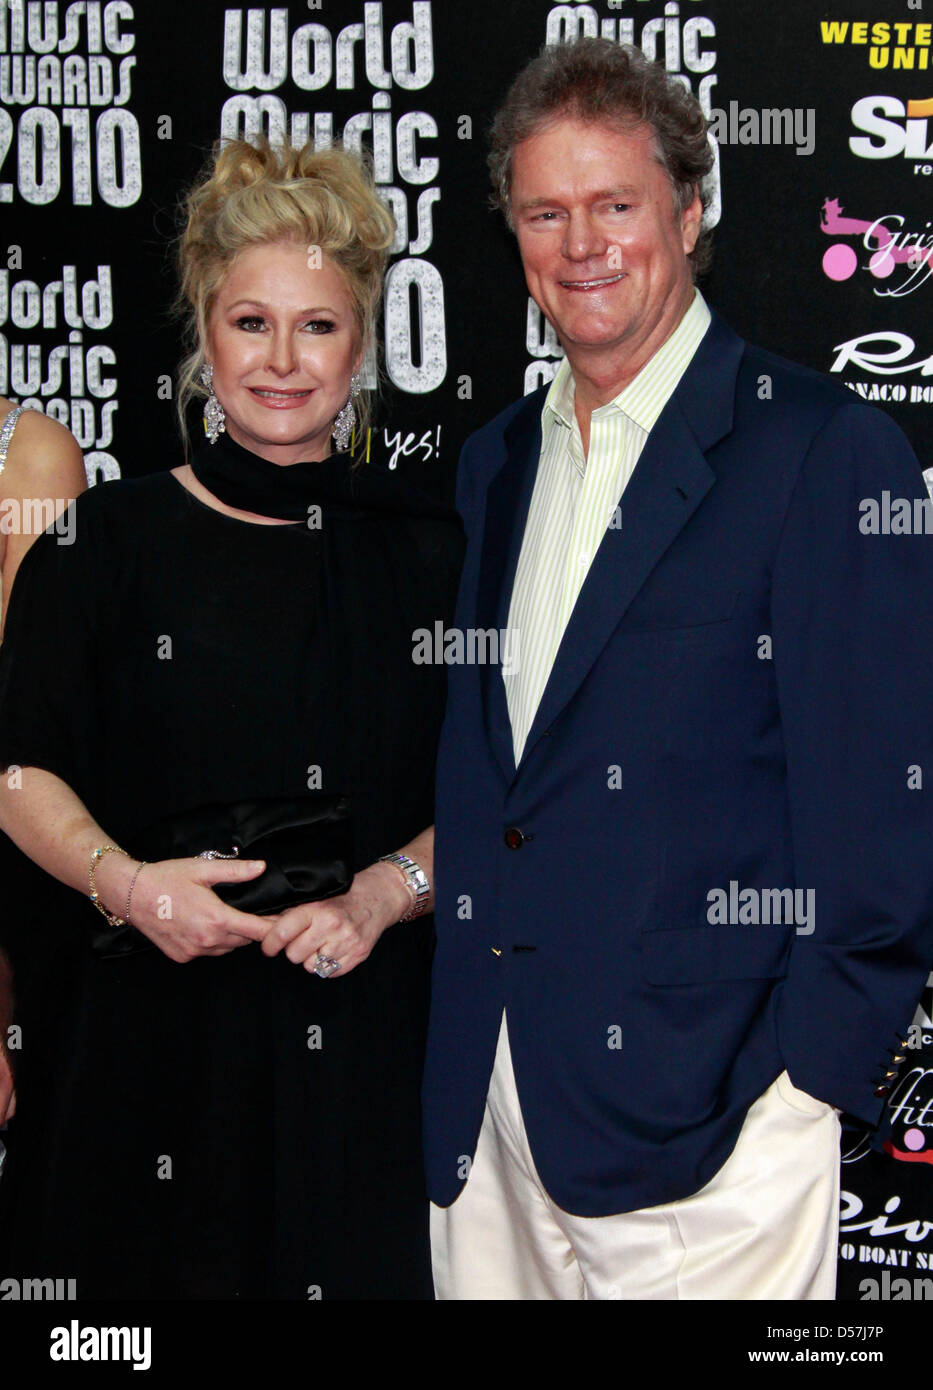 Kathy Hilton and Rick Hilton arrive at the World Music Awards 2010 at the Sporting Club in Monte Carlo, Monaco, 18 May 2010. Photo: Hubert Boesl Stock Photo